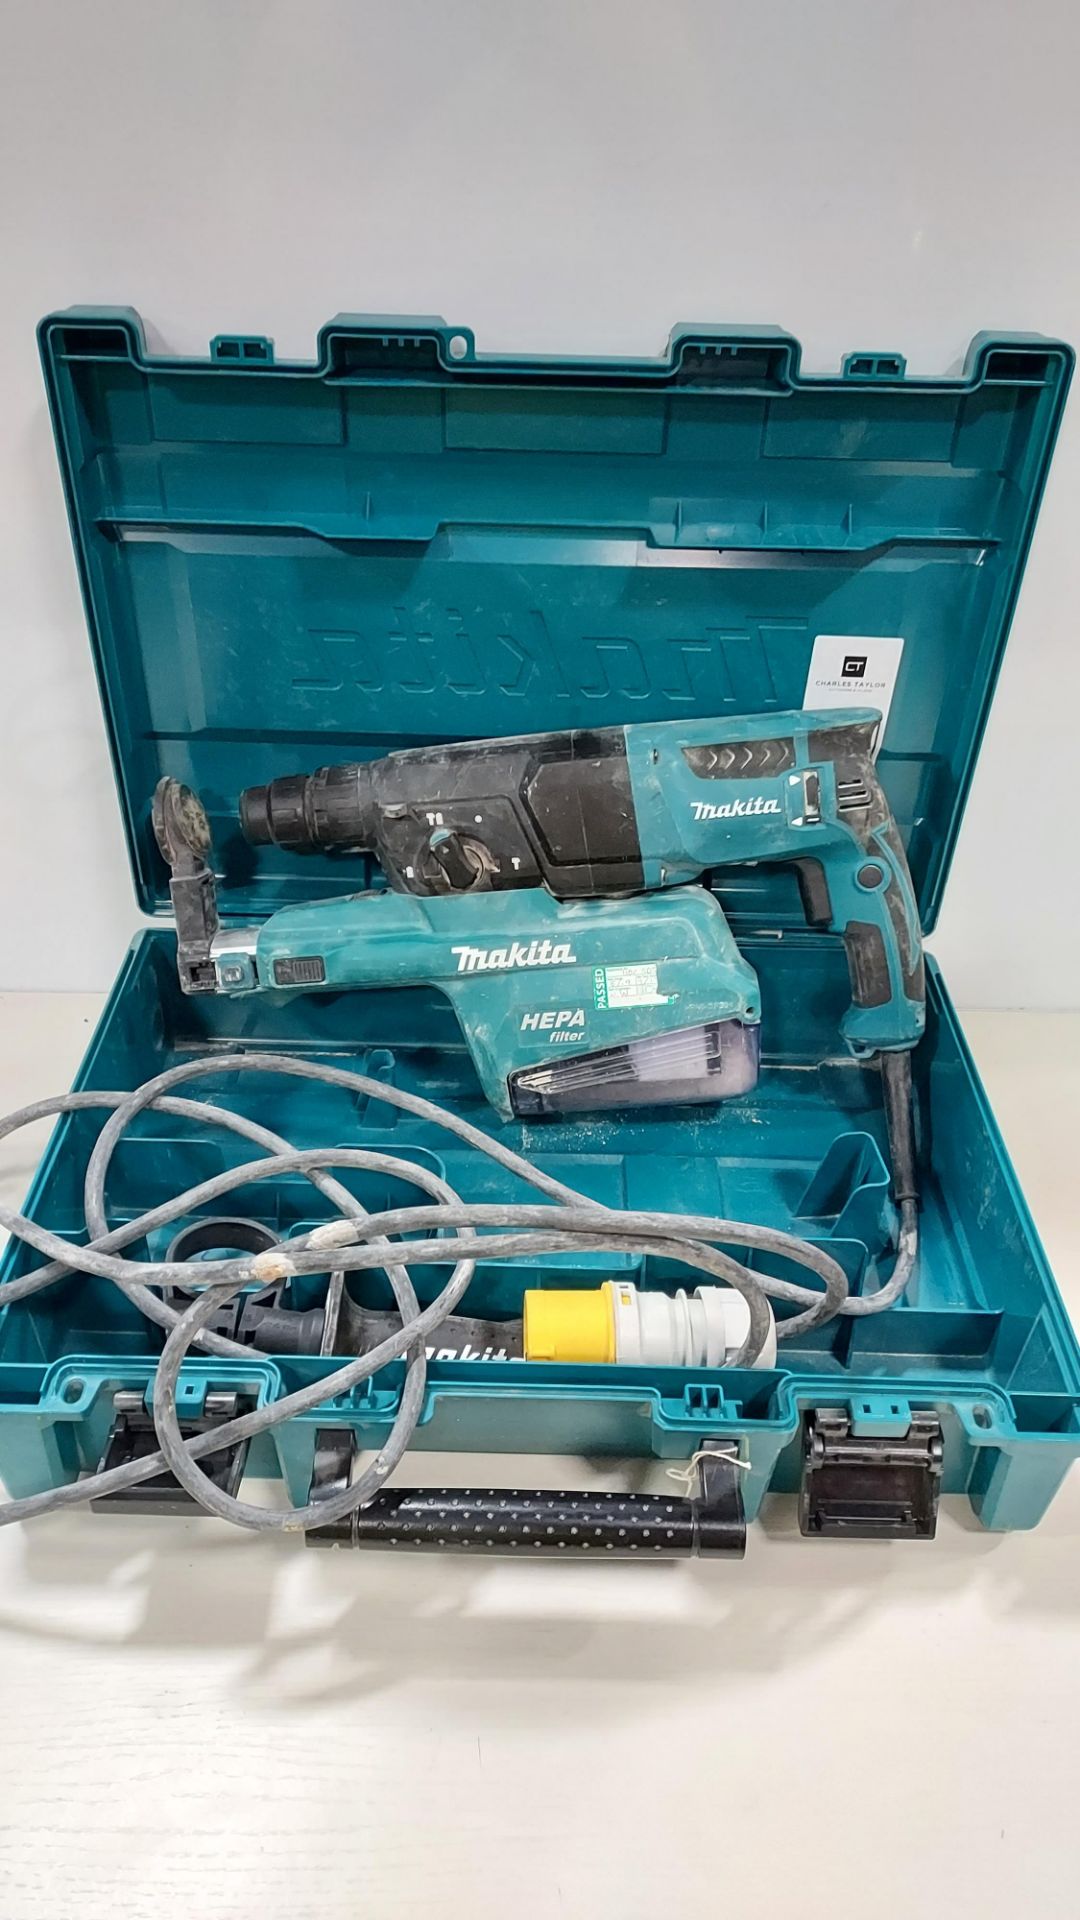 1 X MAKITA COMBINATION HAMMER DRILL WITH SELF DUST COLLECTION. HR2650, 110V